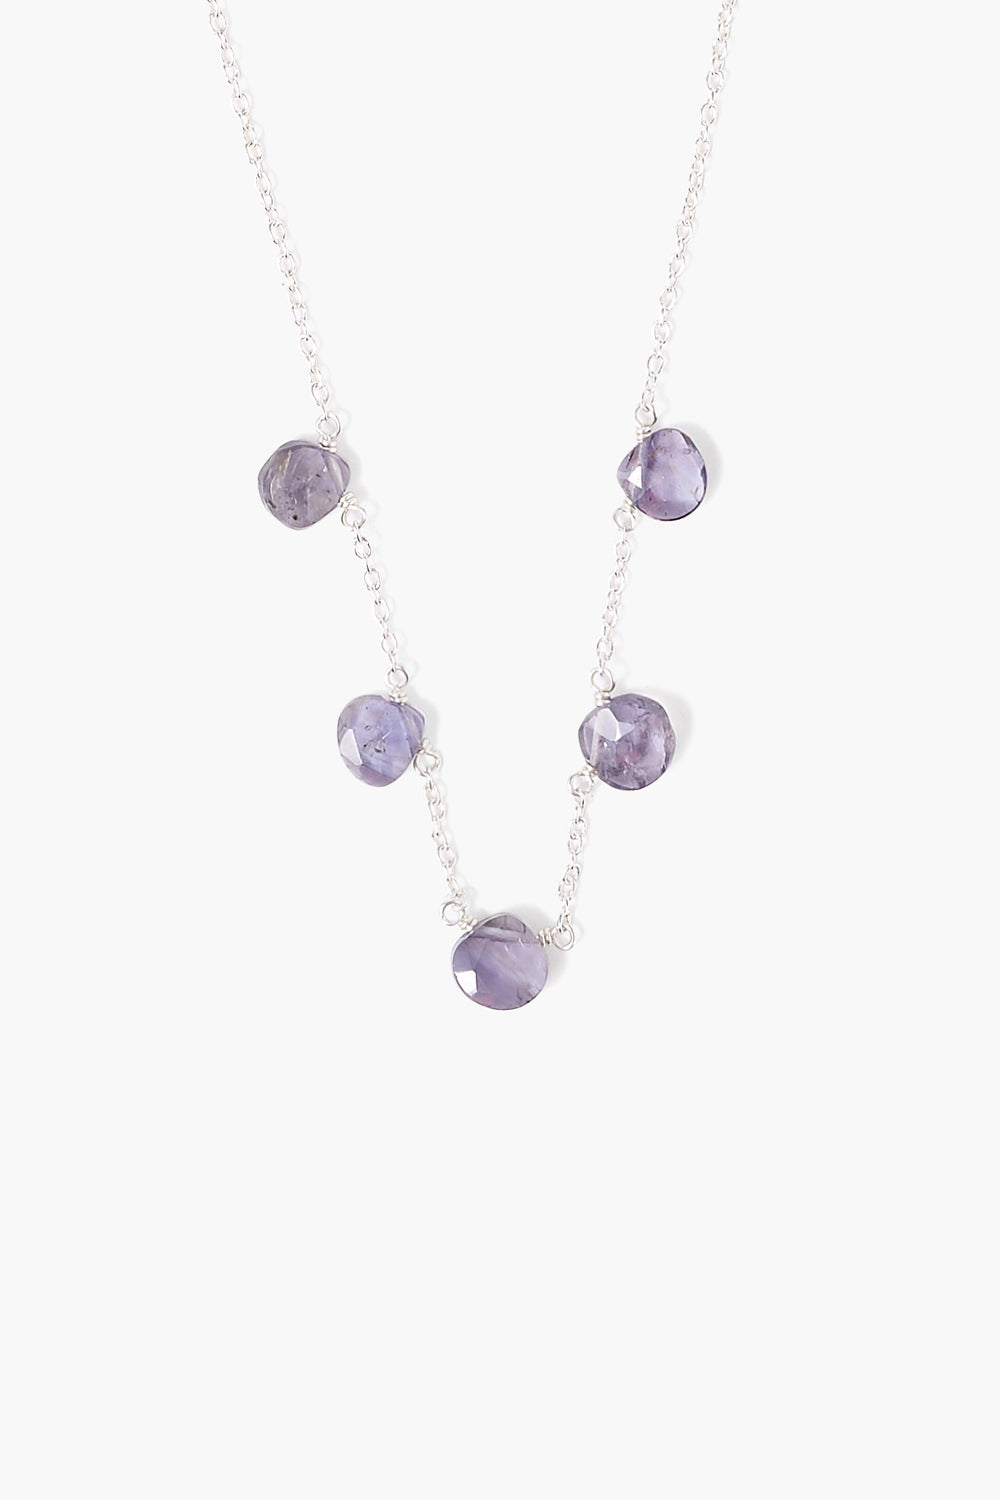 IOLITE 5 STONE NECKLACE - Kingfisher Road - Online Boutique